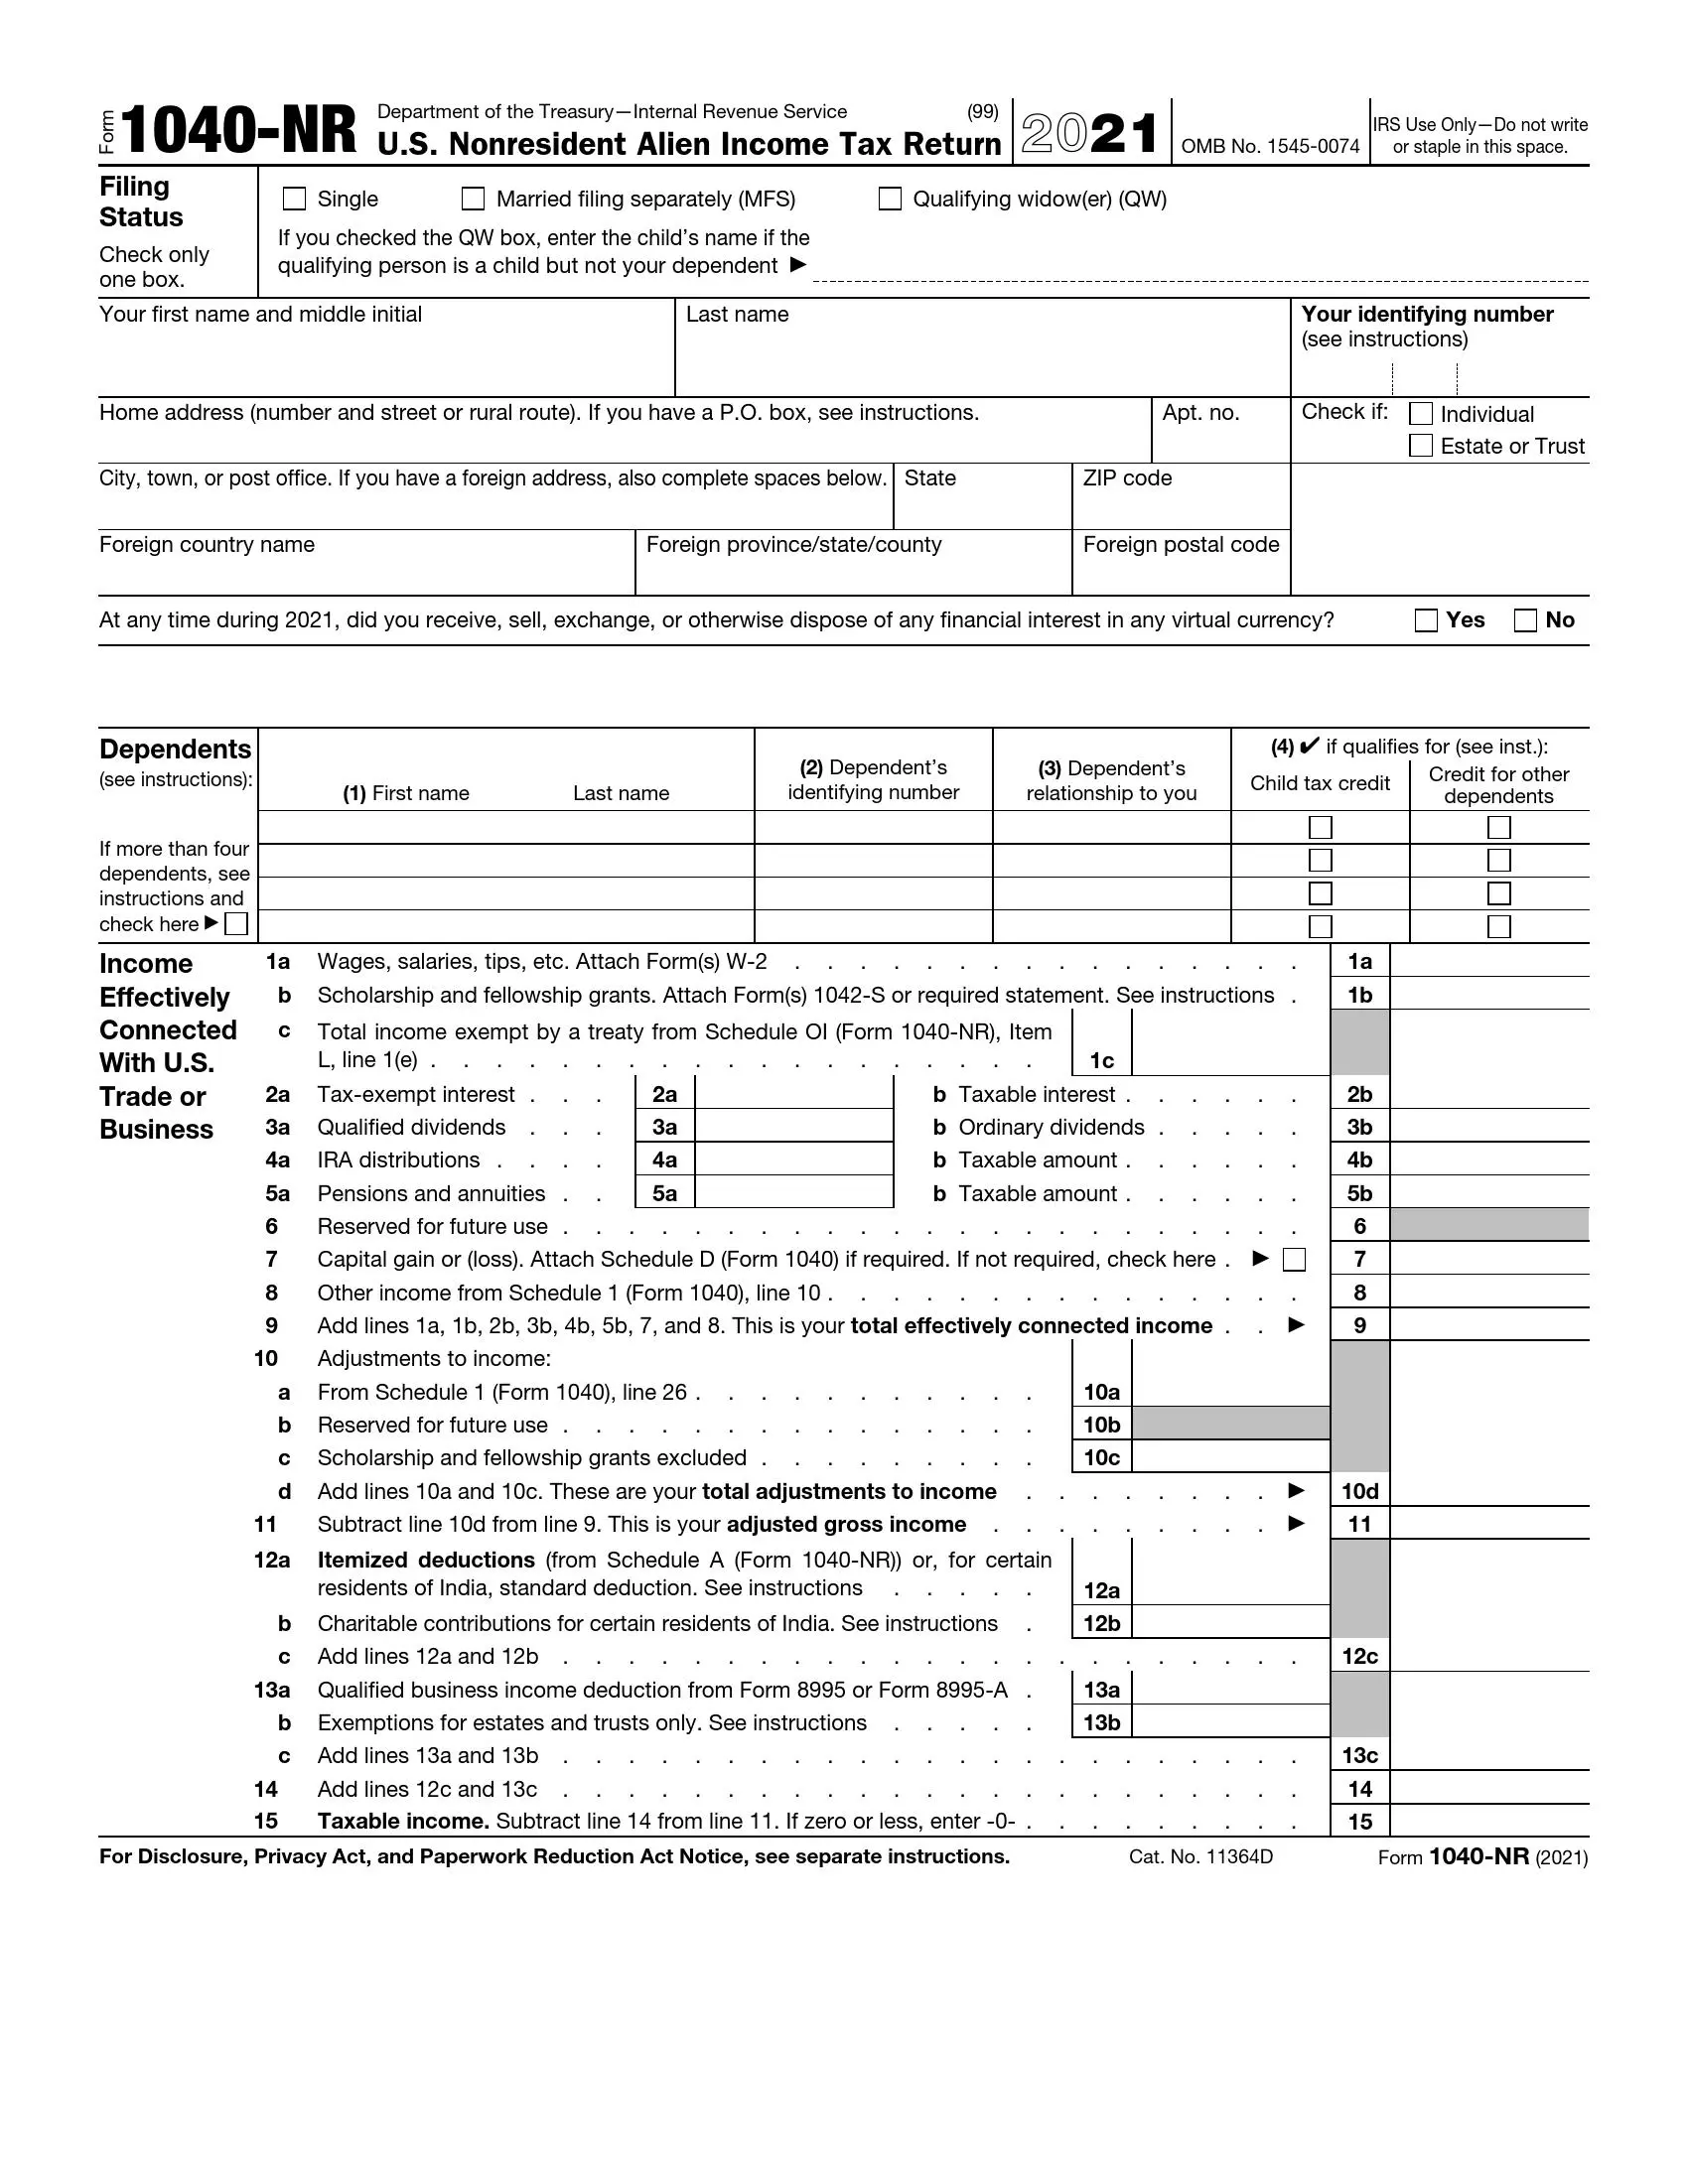 irs form 1040 nr 2021 preview